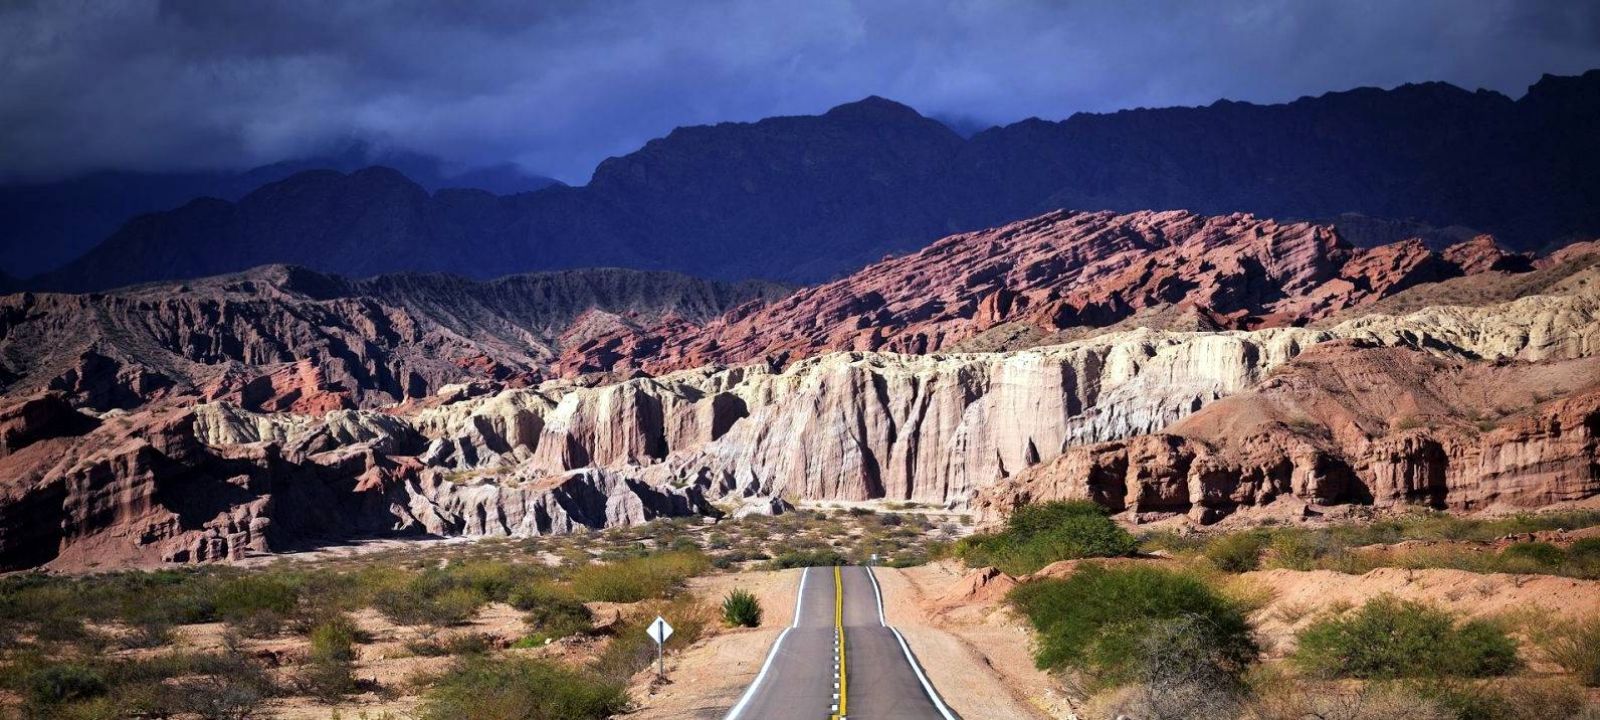 tours in north argentina